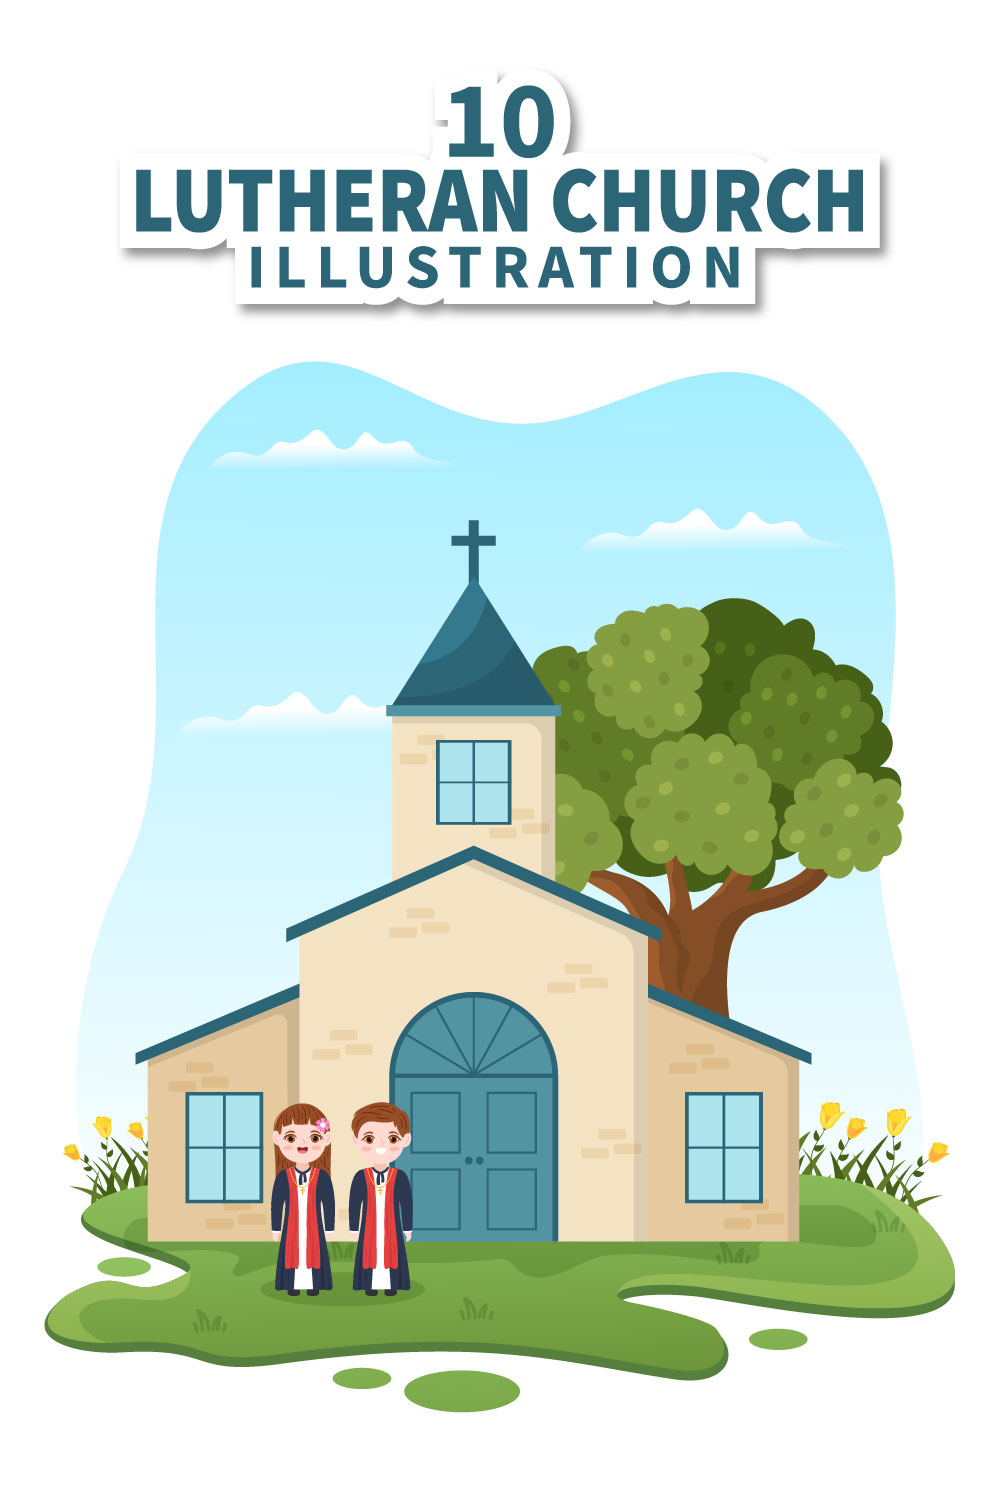 Lutheran Church and Pastor Graphics Design pinterest image.